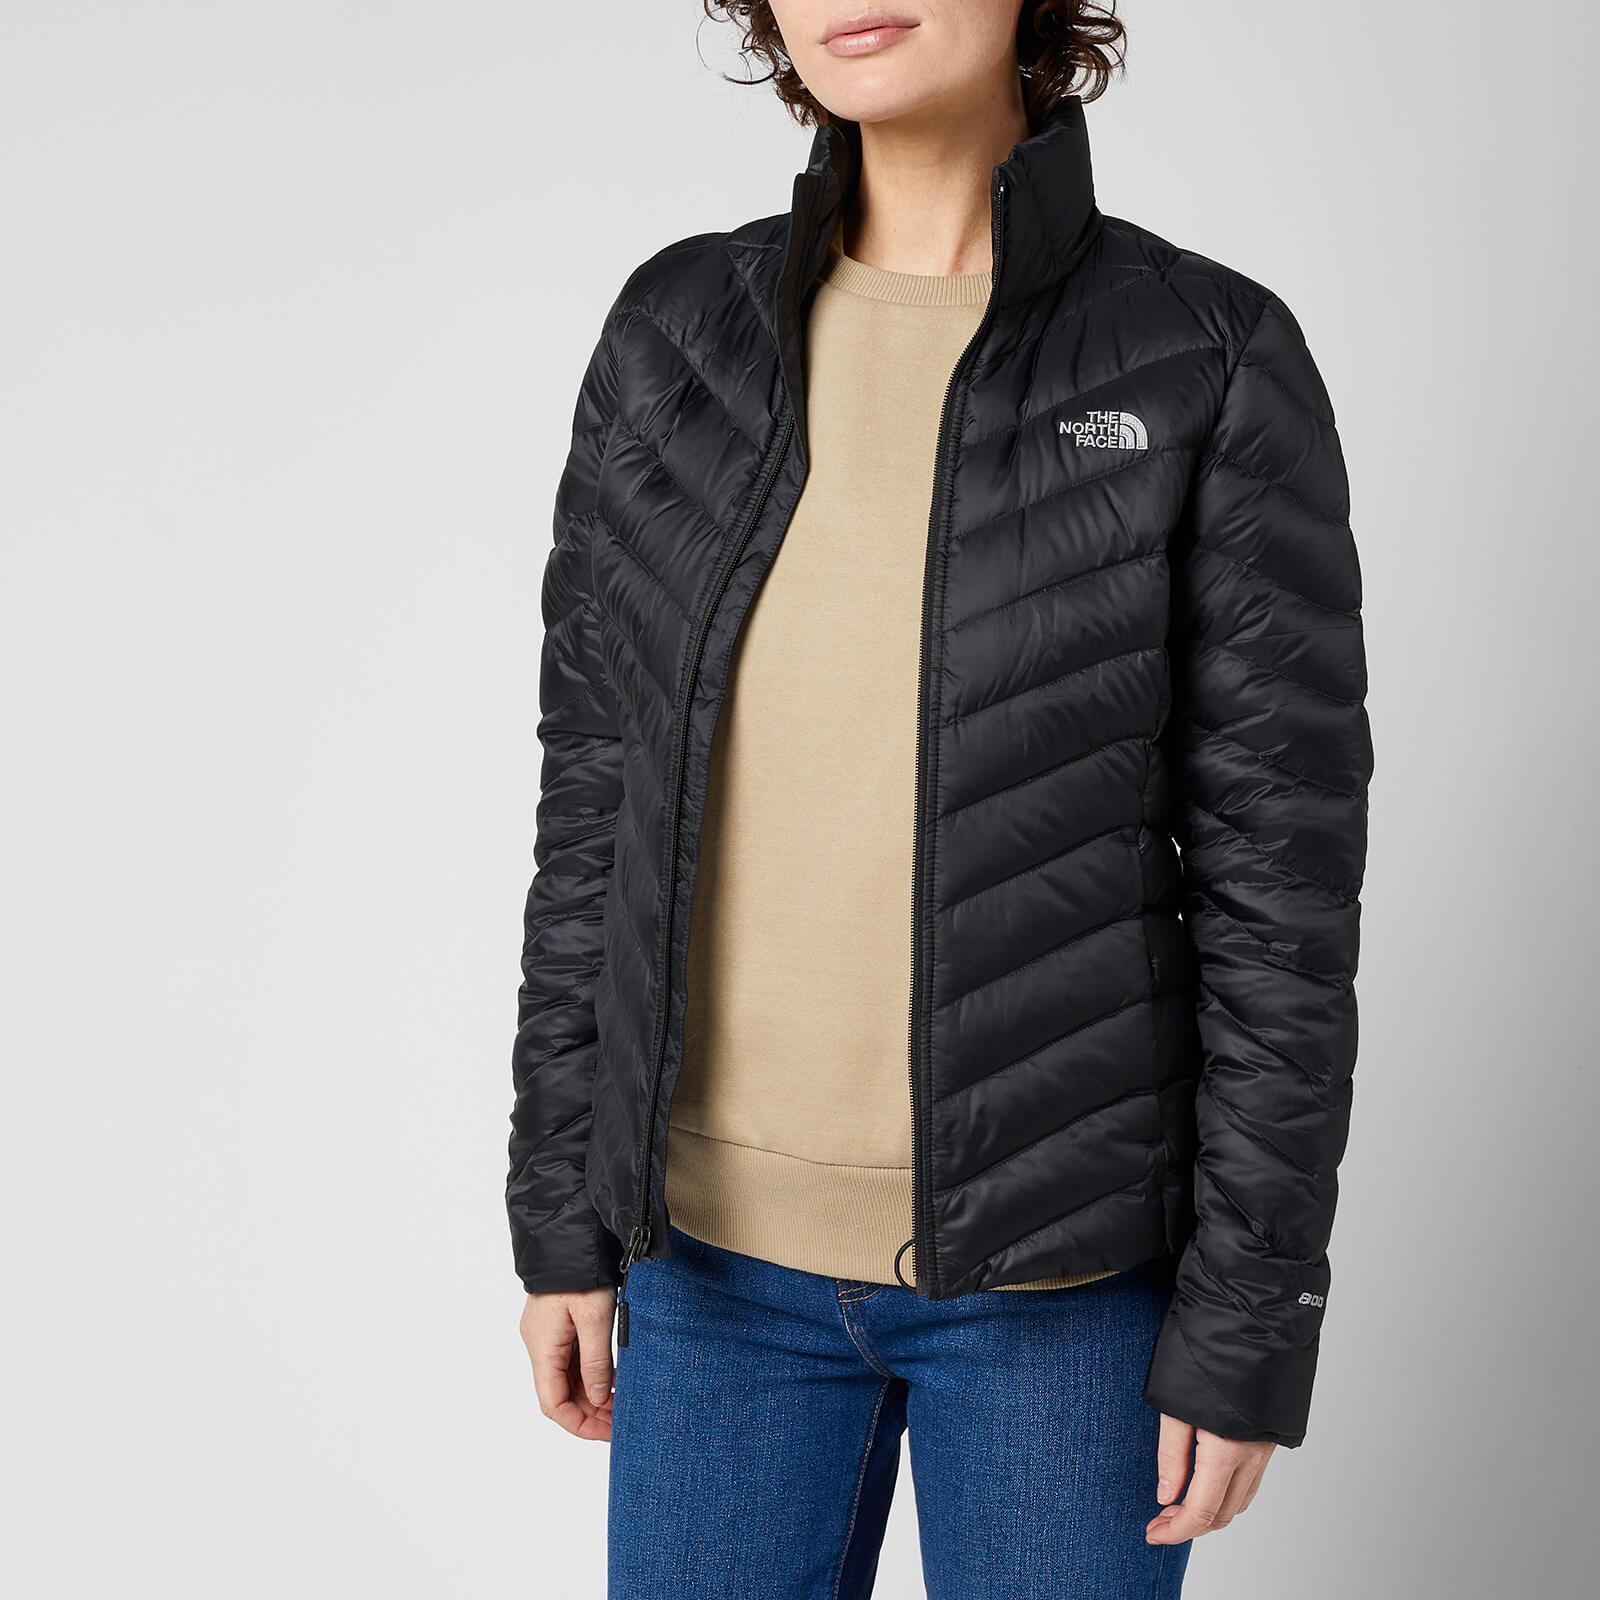 The North Face Women's Trevail Jacket - Black - XS